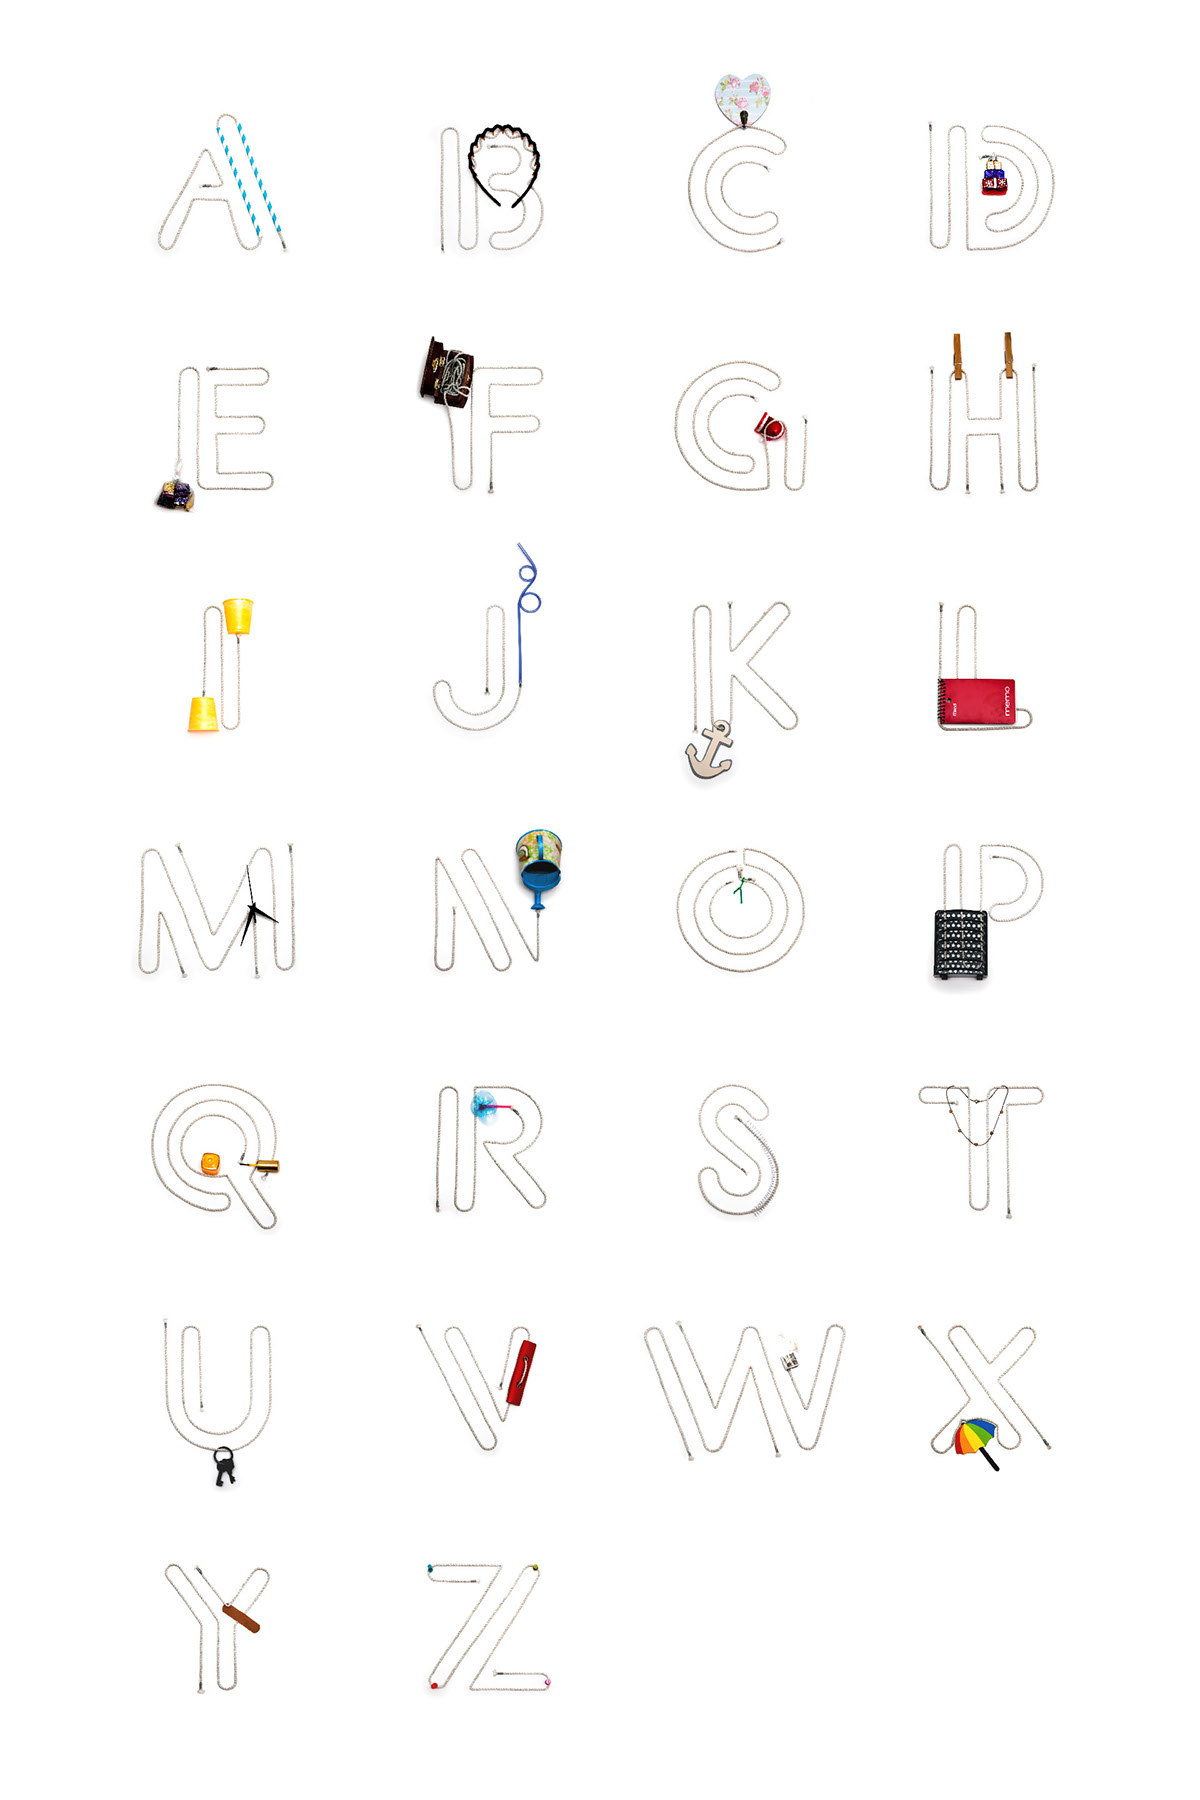 time alphabet Letterform random letters poster design objects materials Items eclectic crumpany